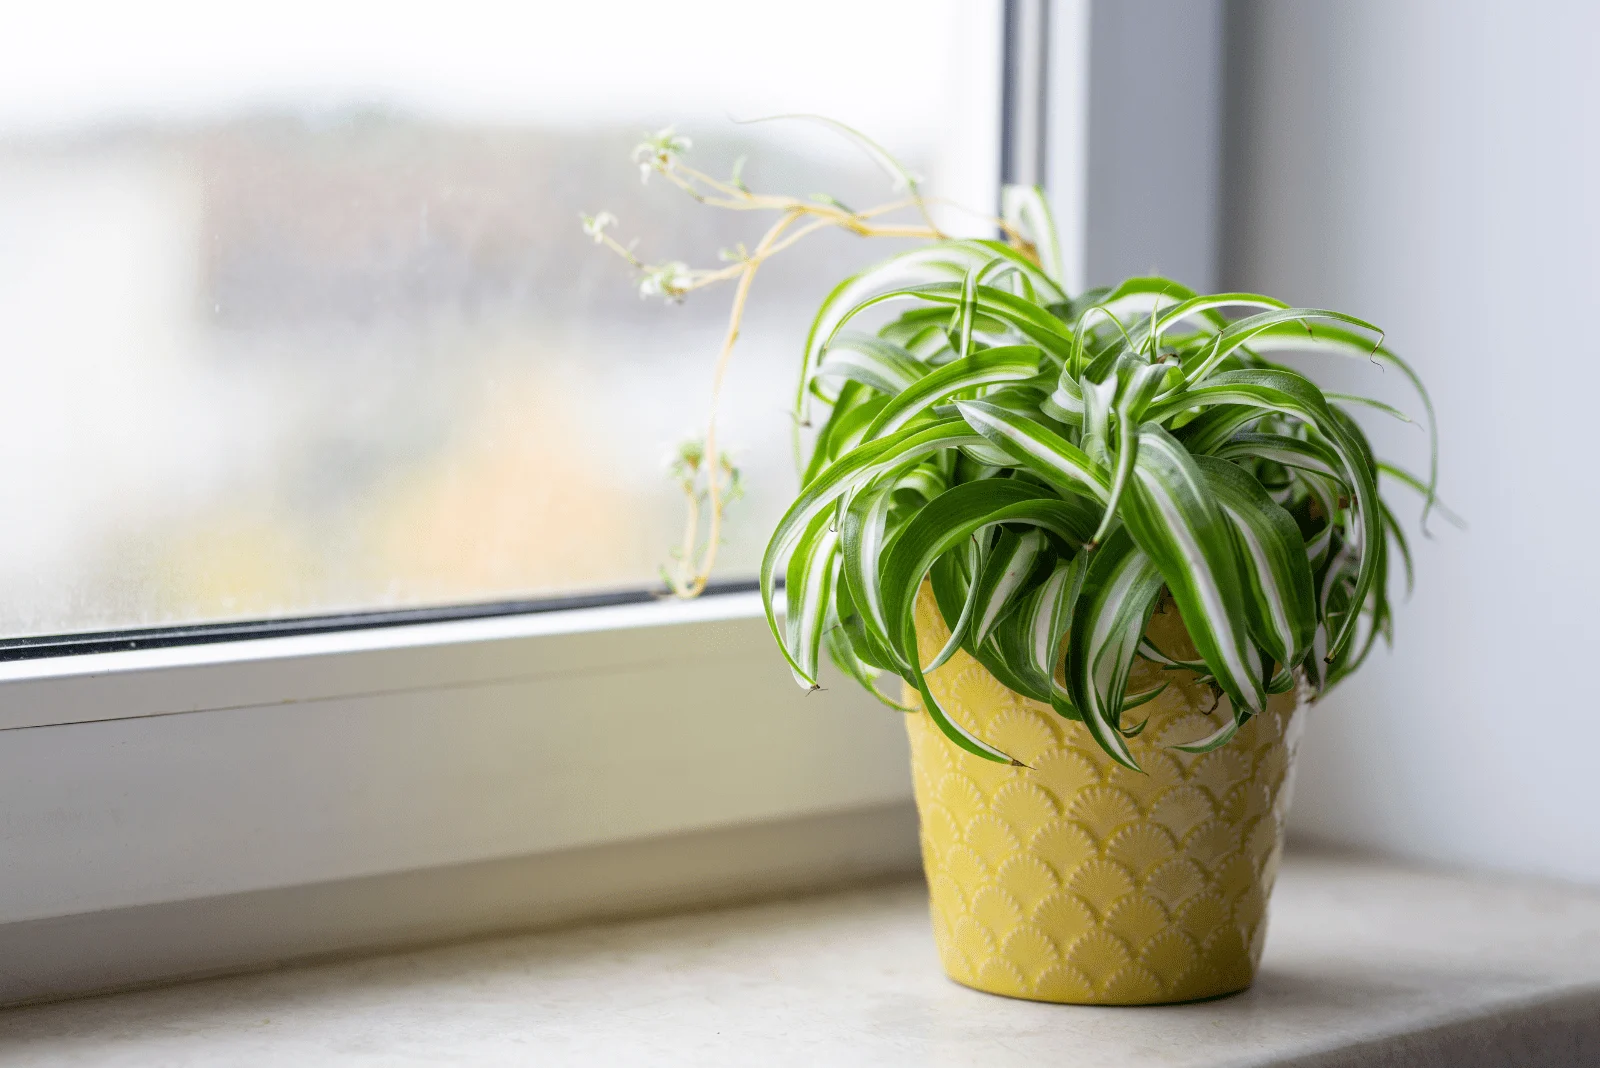 Spider Plants in a pot